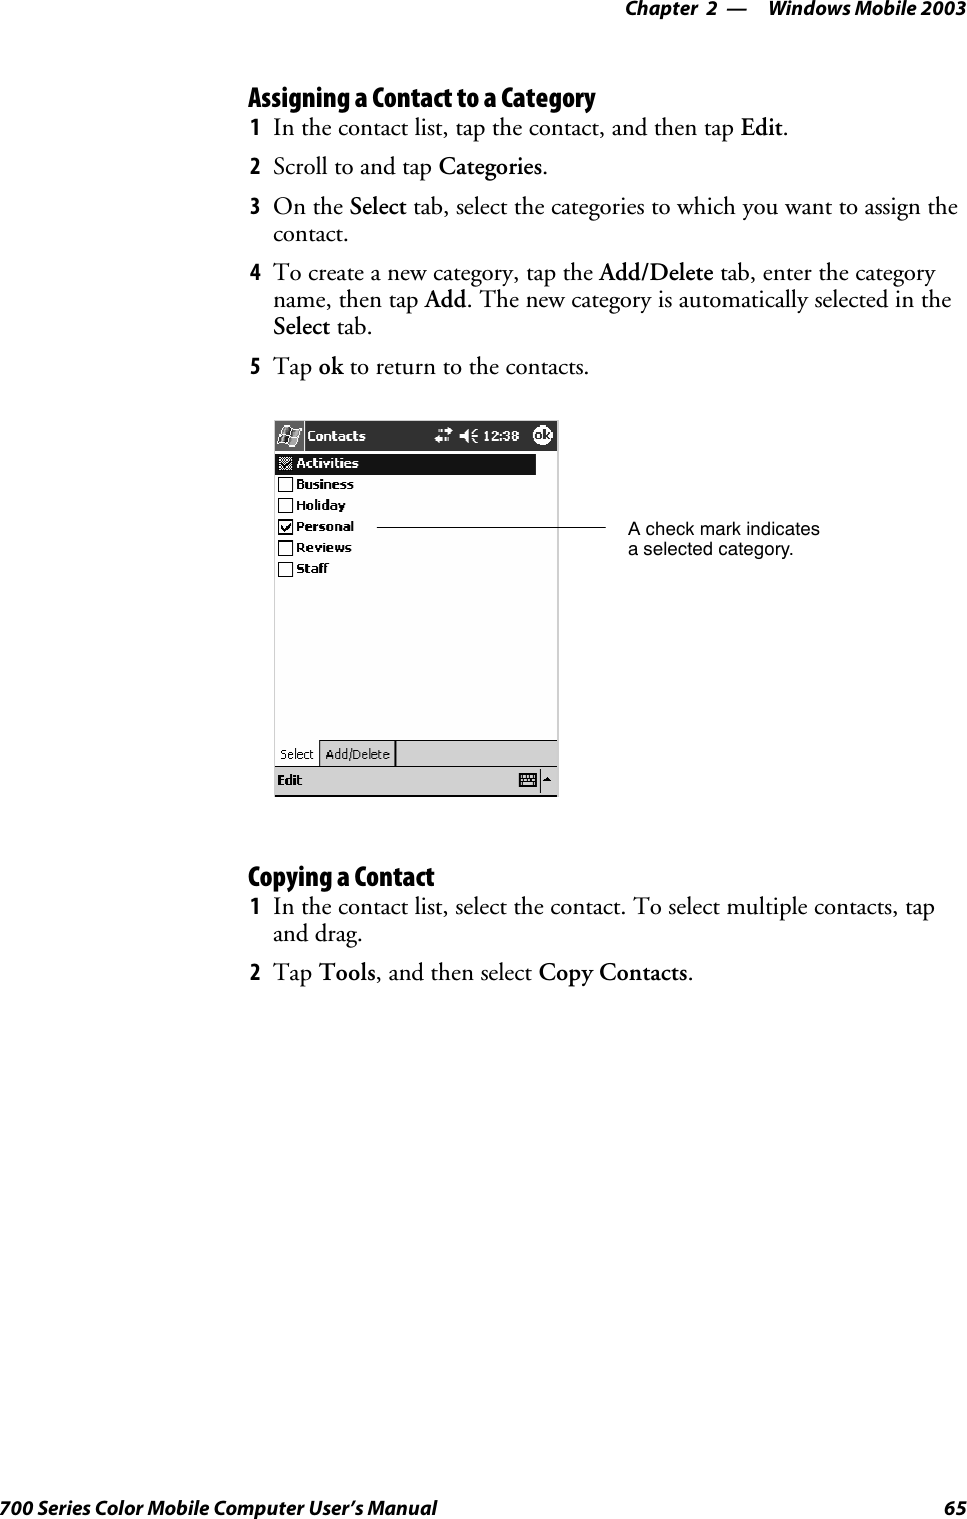 Windows Mobile 2003—Chapter 265700 Series Color Mobile Computer User’s ManualAssigning a Contact to a Category1In the contact list, tap the contact, and then tap Edit.2Scroll to and tap Categories.3On the Select tab, select the categories to which you want to assign thecontact.4To create a new category, tap the Add/Delete tab, enter the categoryname, then tap Add. The new category is automatically selected in theSelect tab.5Tap ok to return to the contacts.A check mark indicatesa selected category.Copying a Contact1In the contact list, select the contact. To select multiple contacts, tapand drag.2Tap Tools, and then select Copy Contacts.